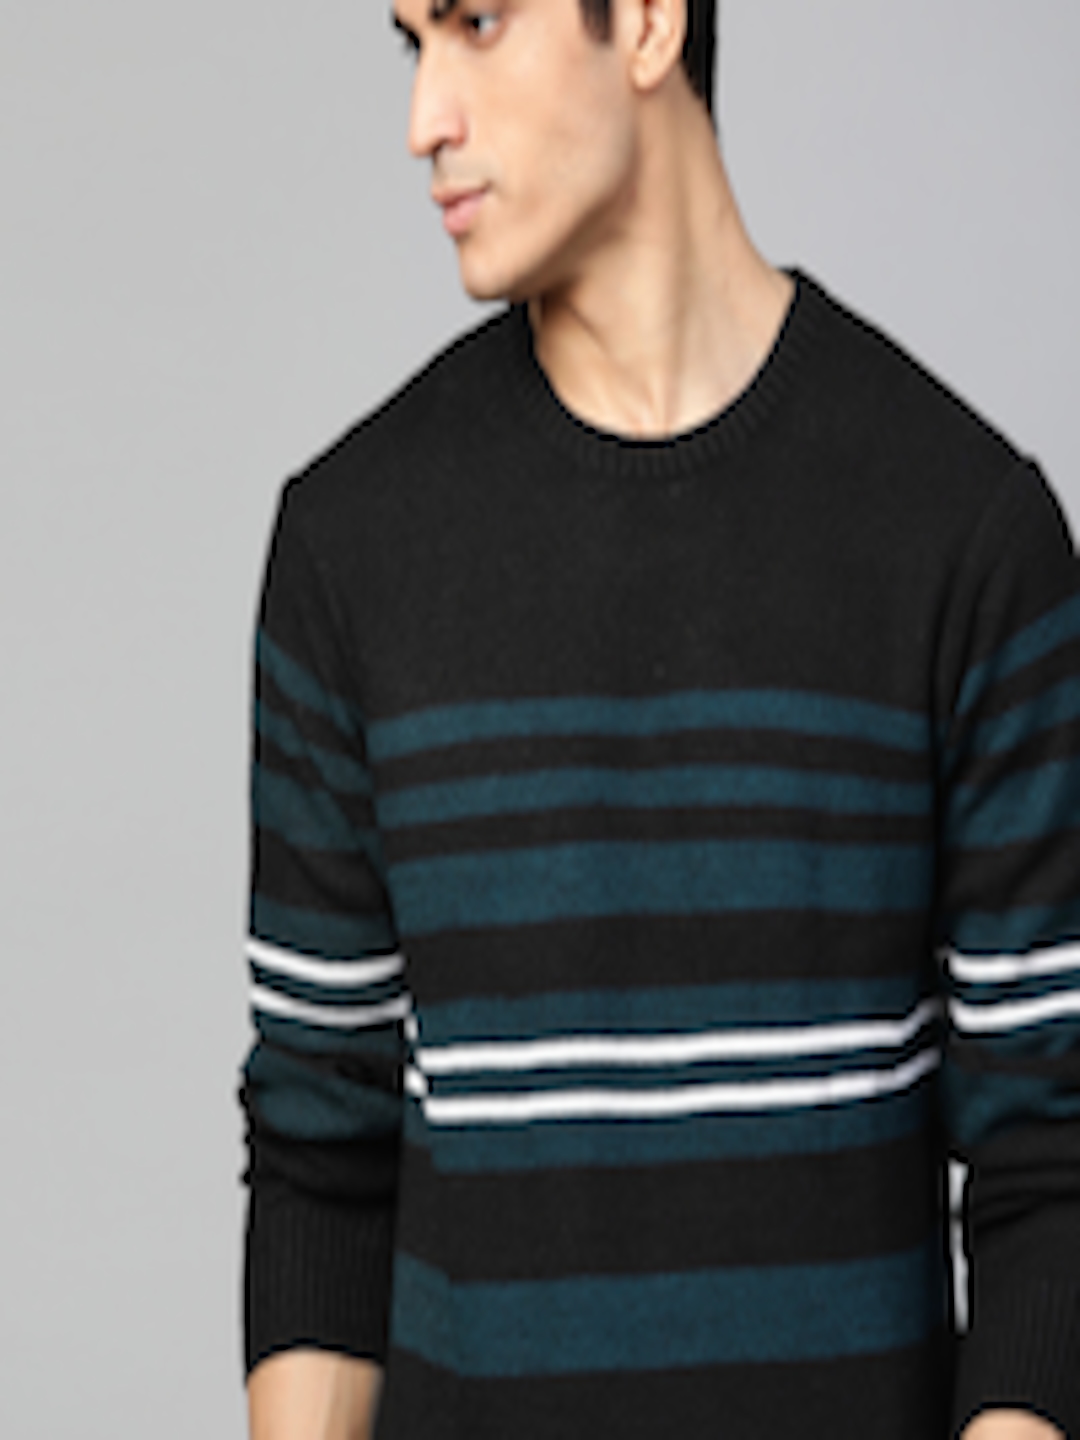 Buy Roadster Men Black & Teal Blue Striped Pullover Sweater - Sweaters ...